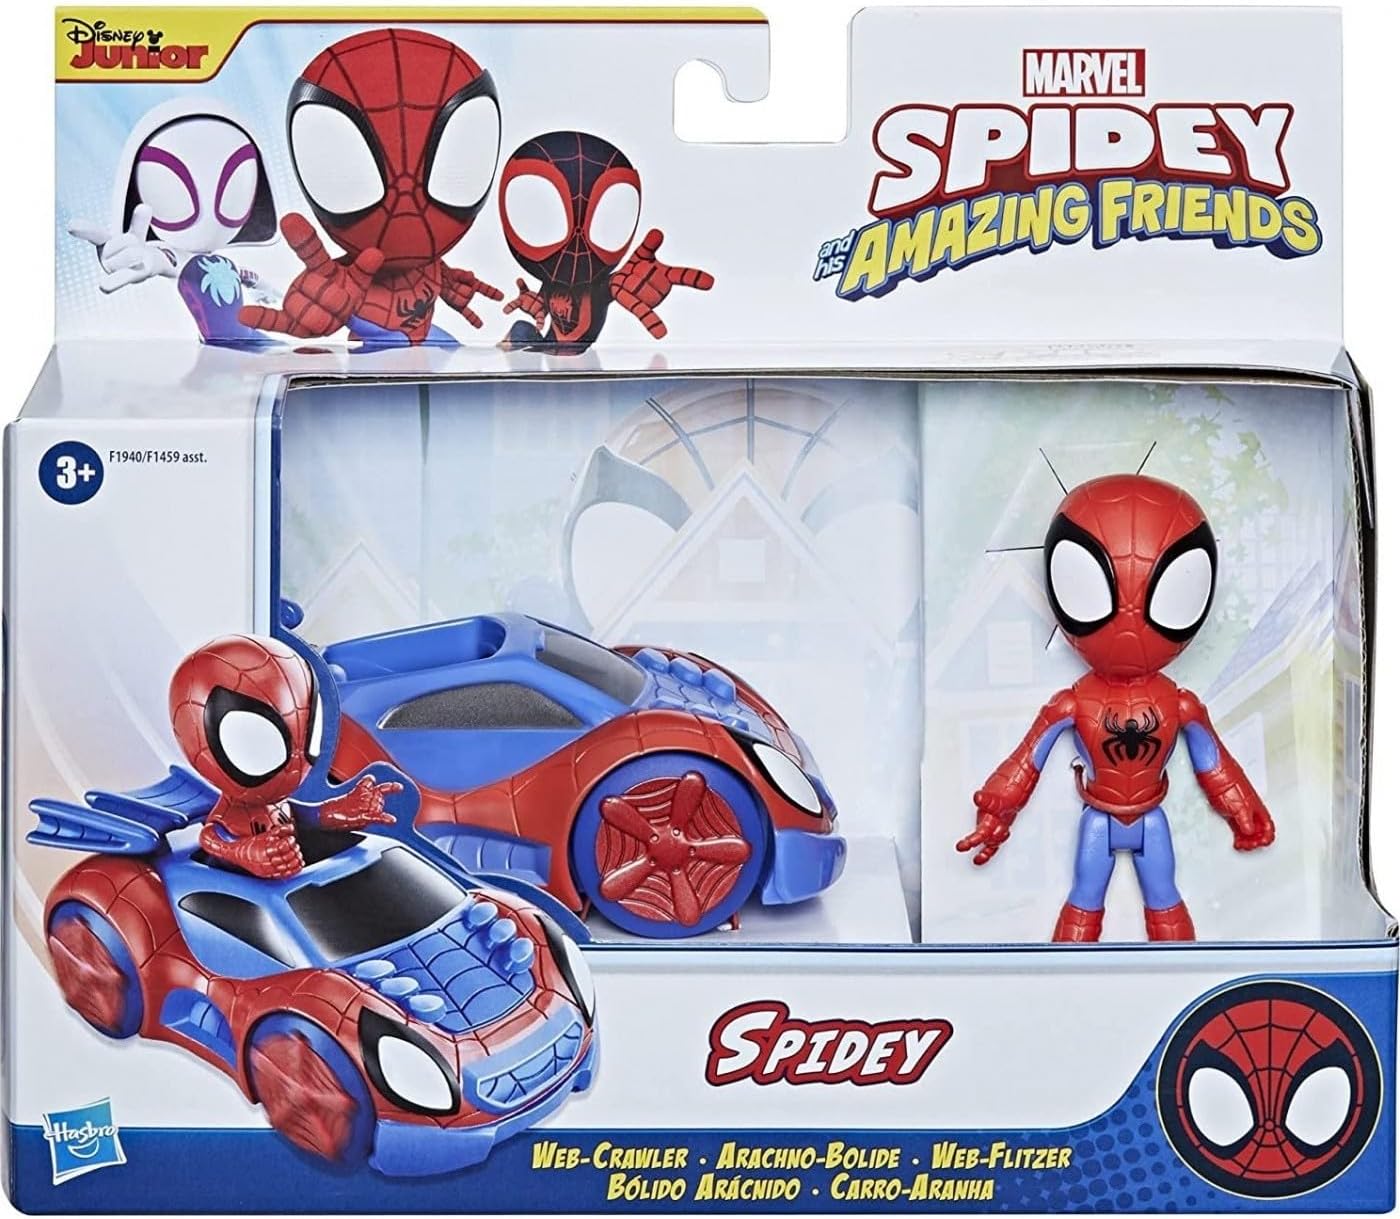 Marvel Spidey and His Amazing Friends Spidey Action Figure and Web-Crawler Vehicle, for Kids Ages 3 and Up